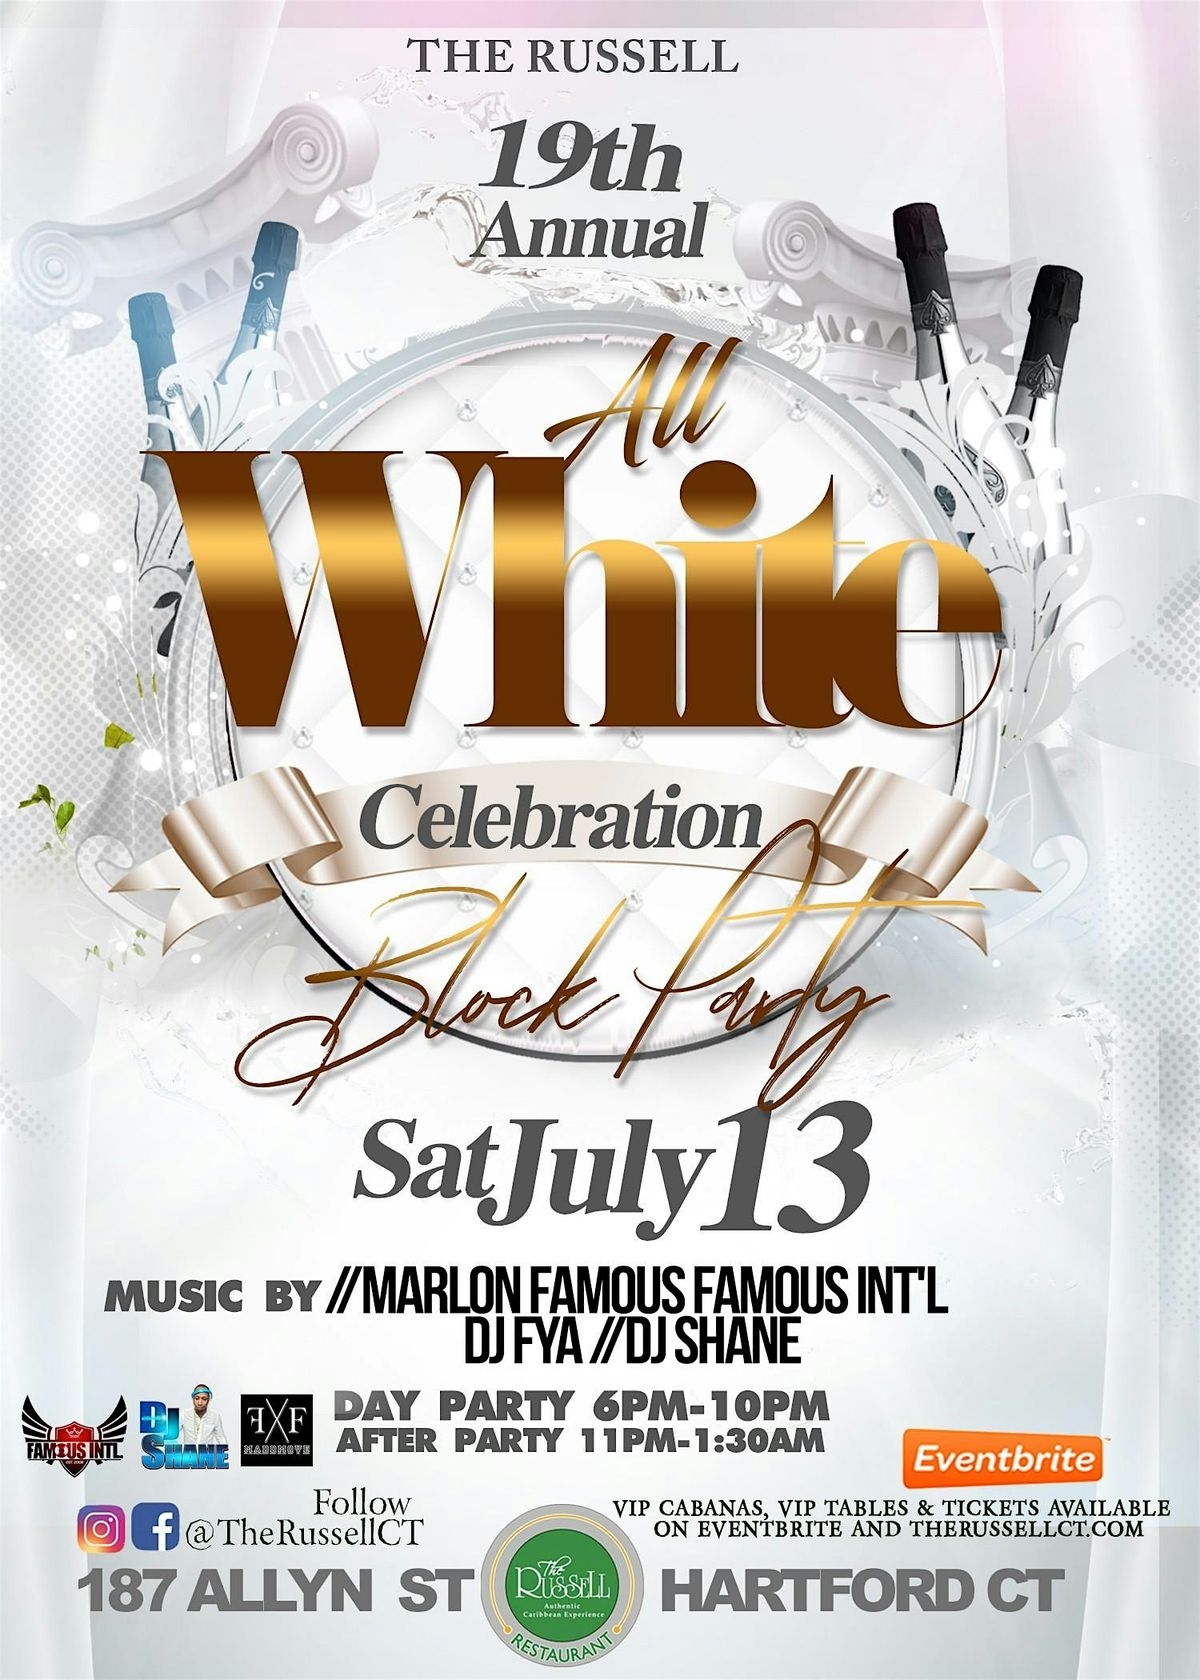 The Russell 19th All White Celebration Block Party